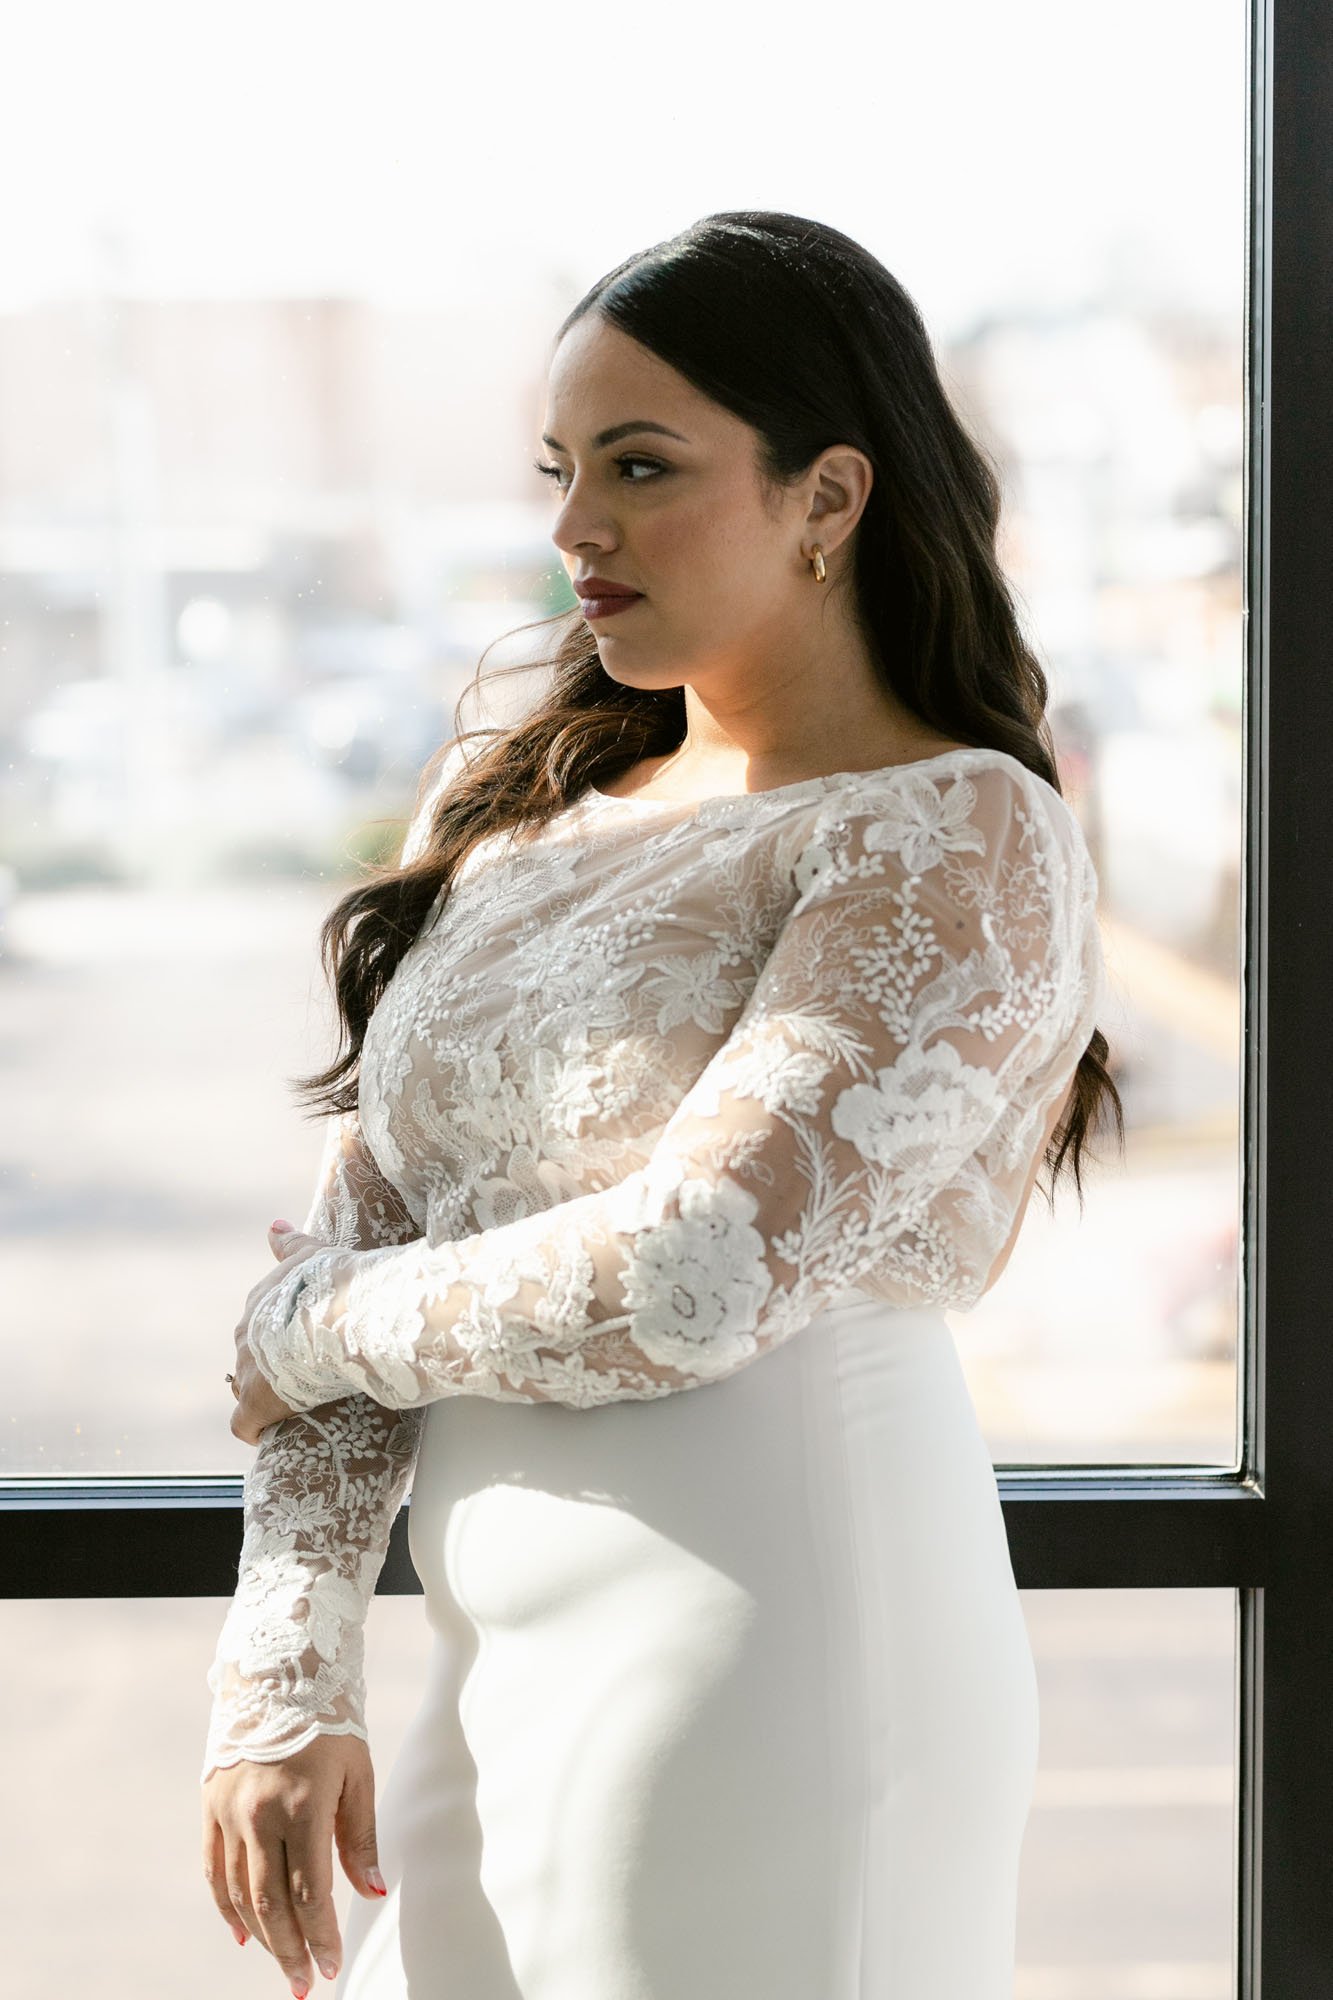 blake by anais anette x aandbe bridal shop is a long sleeve lace and crepe skirt wedding dress